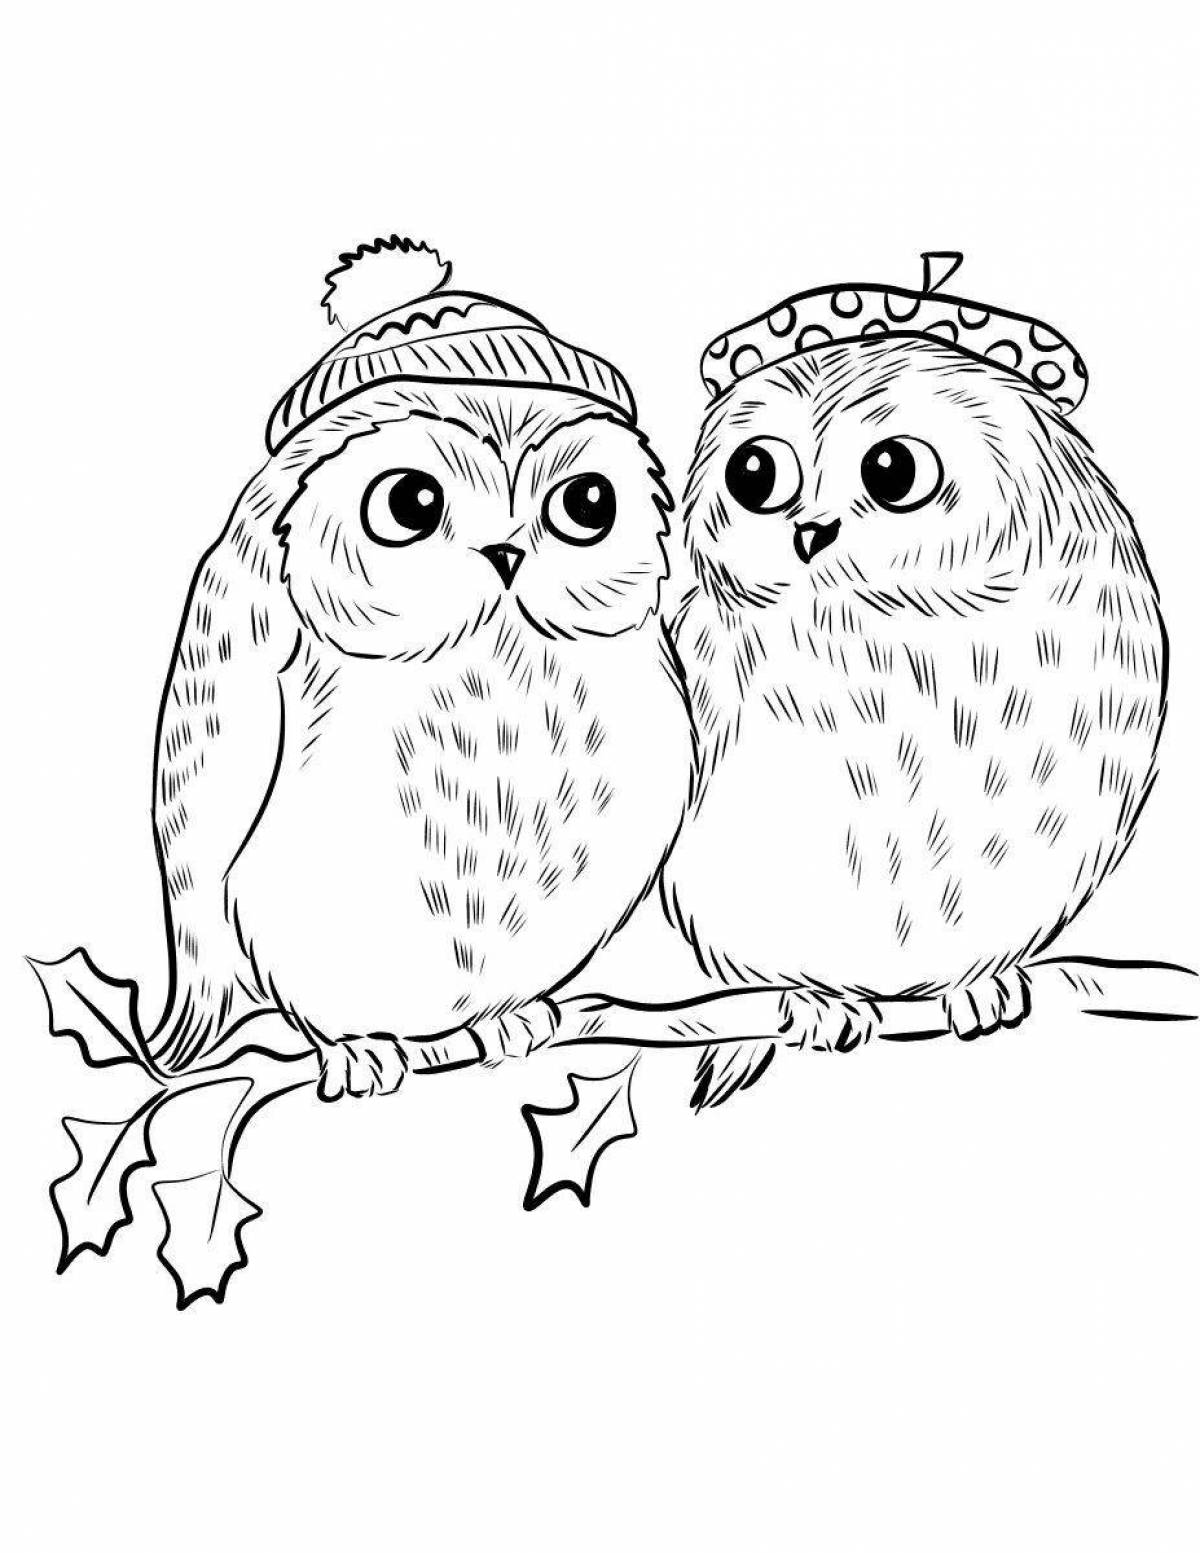 Owl picture #5